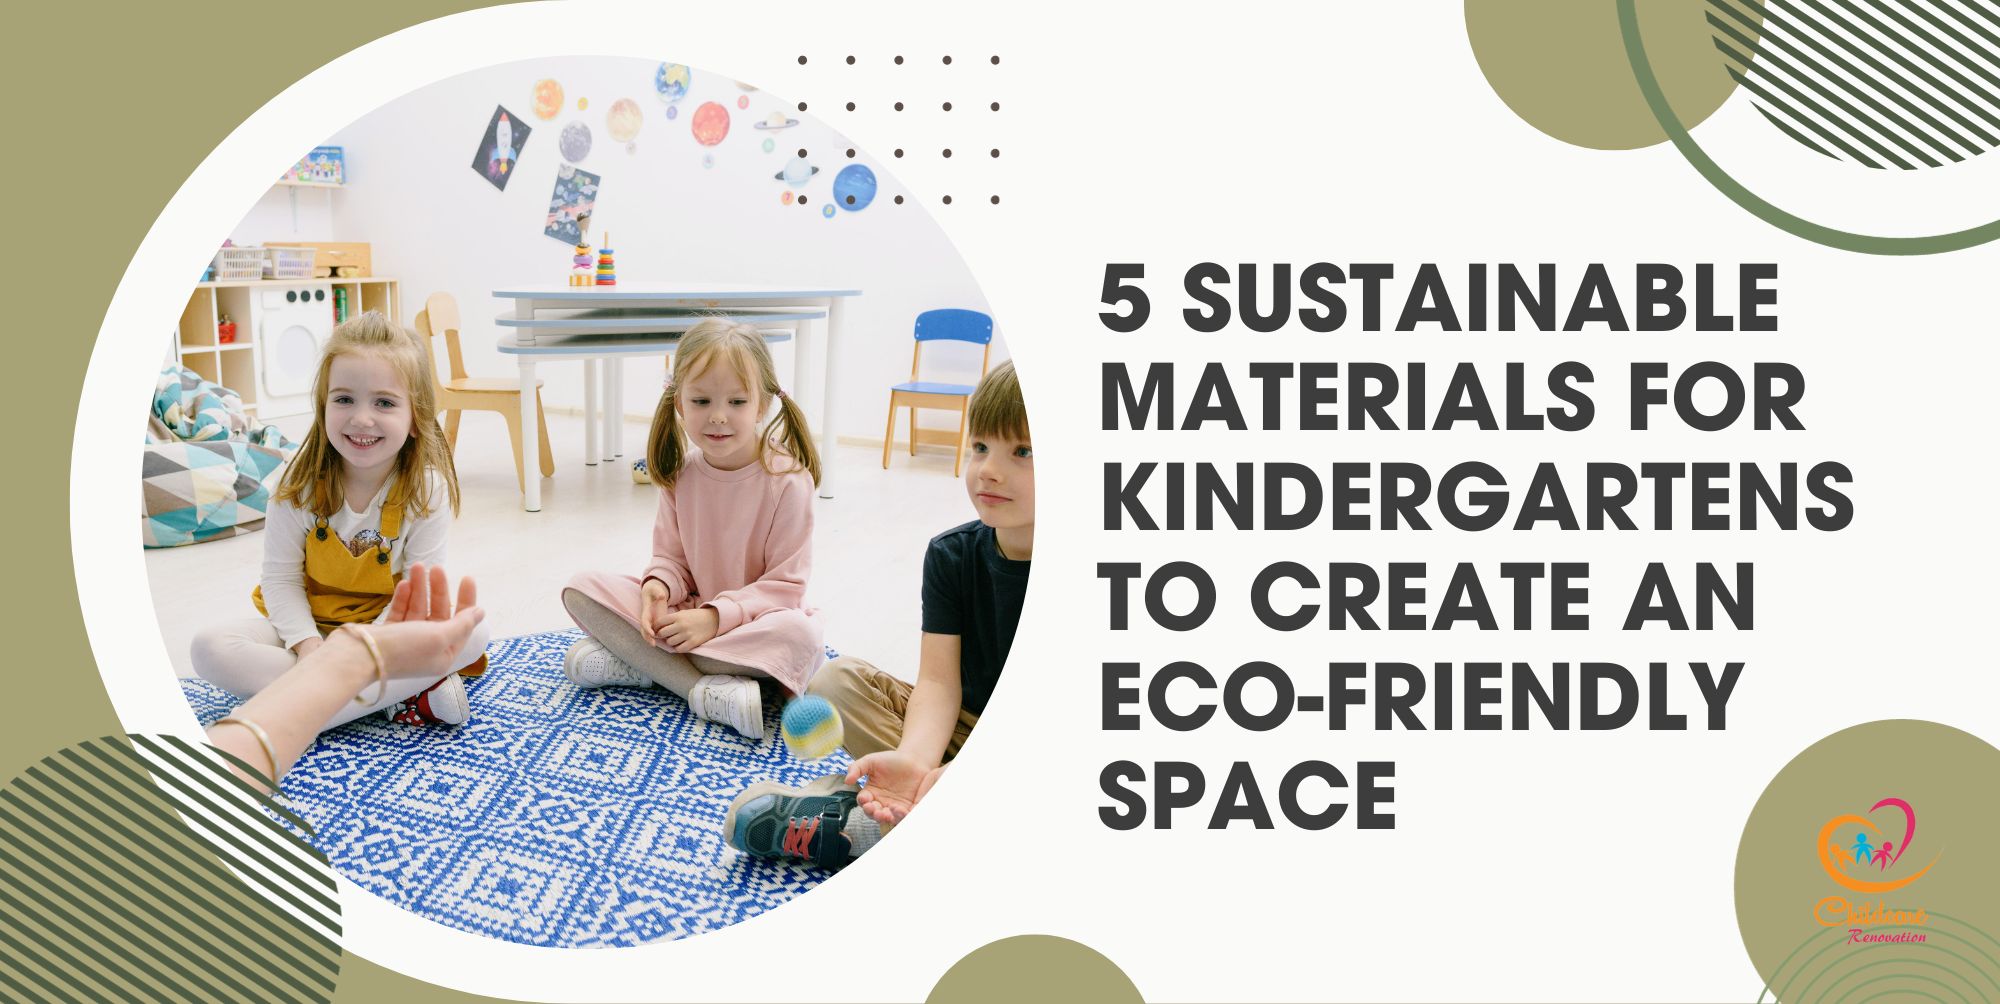 5 Sustainable Materials For Kindergartens To Create An Eco-Friendly Space